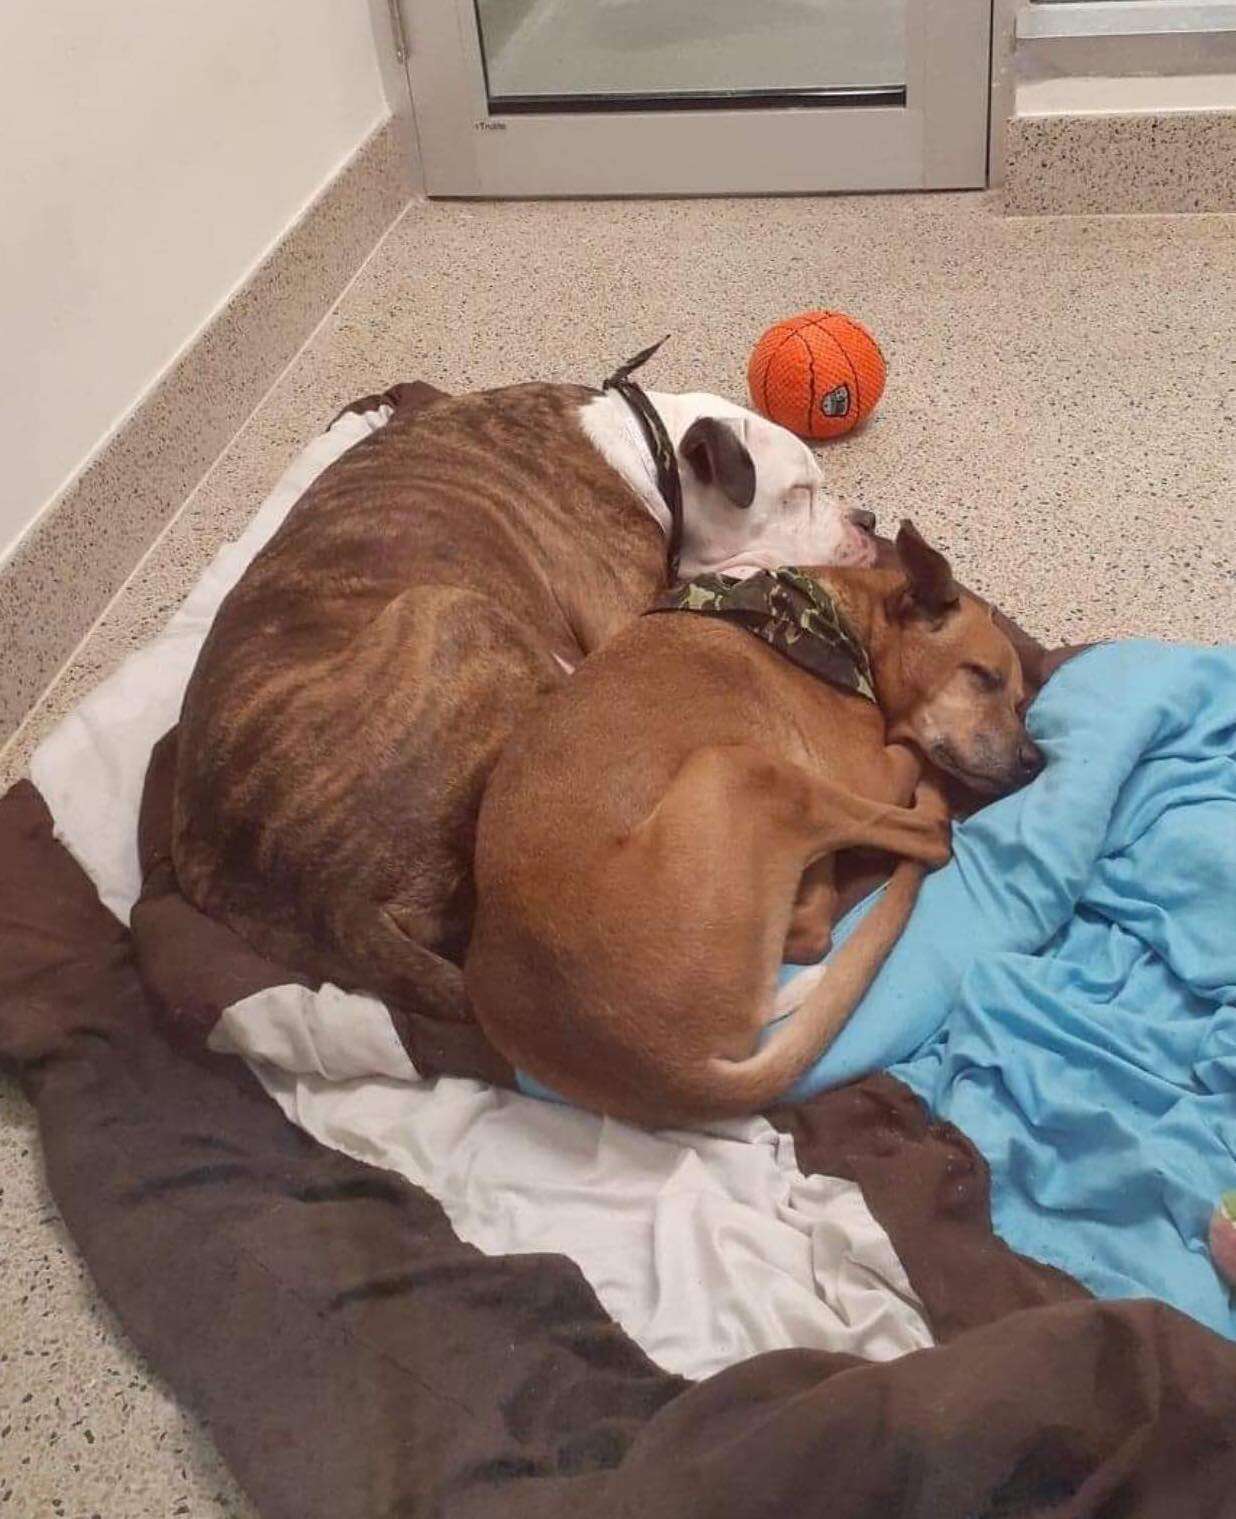 Bonded dogs sleep together at the shelter